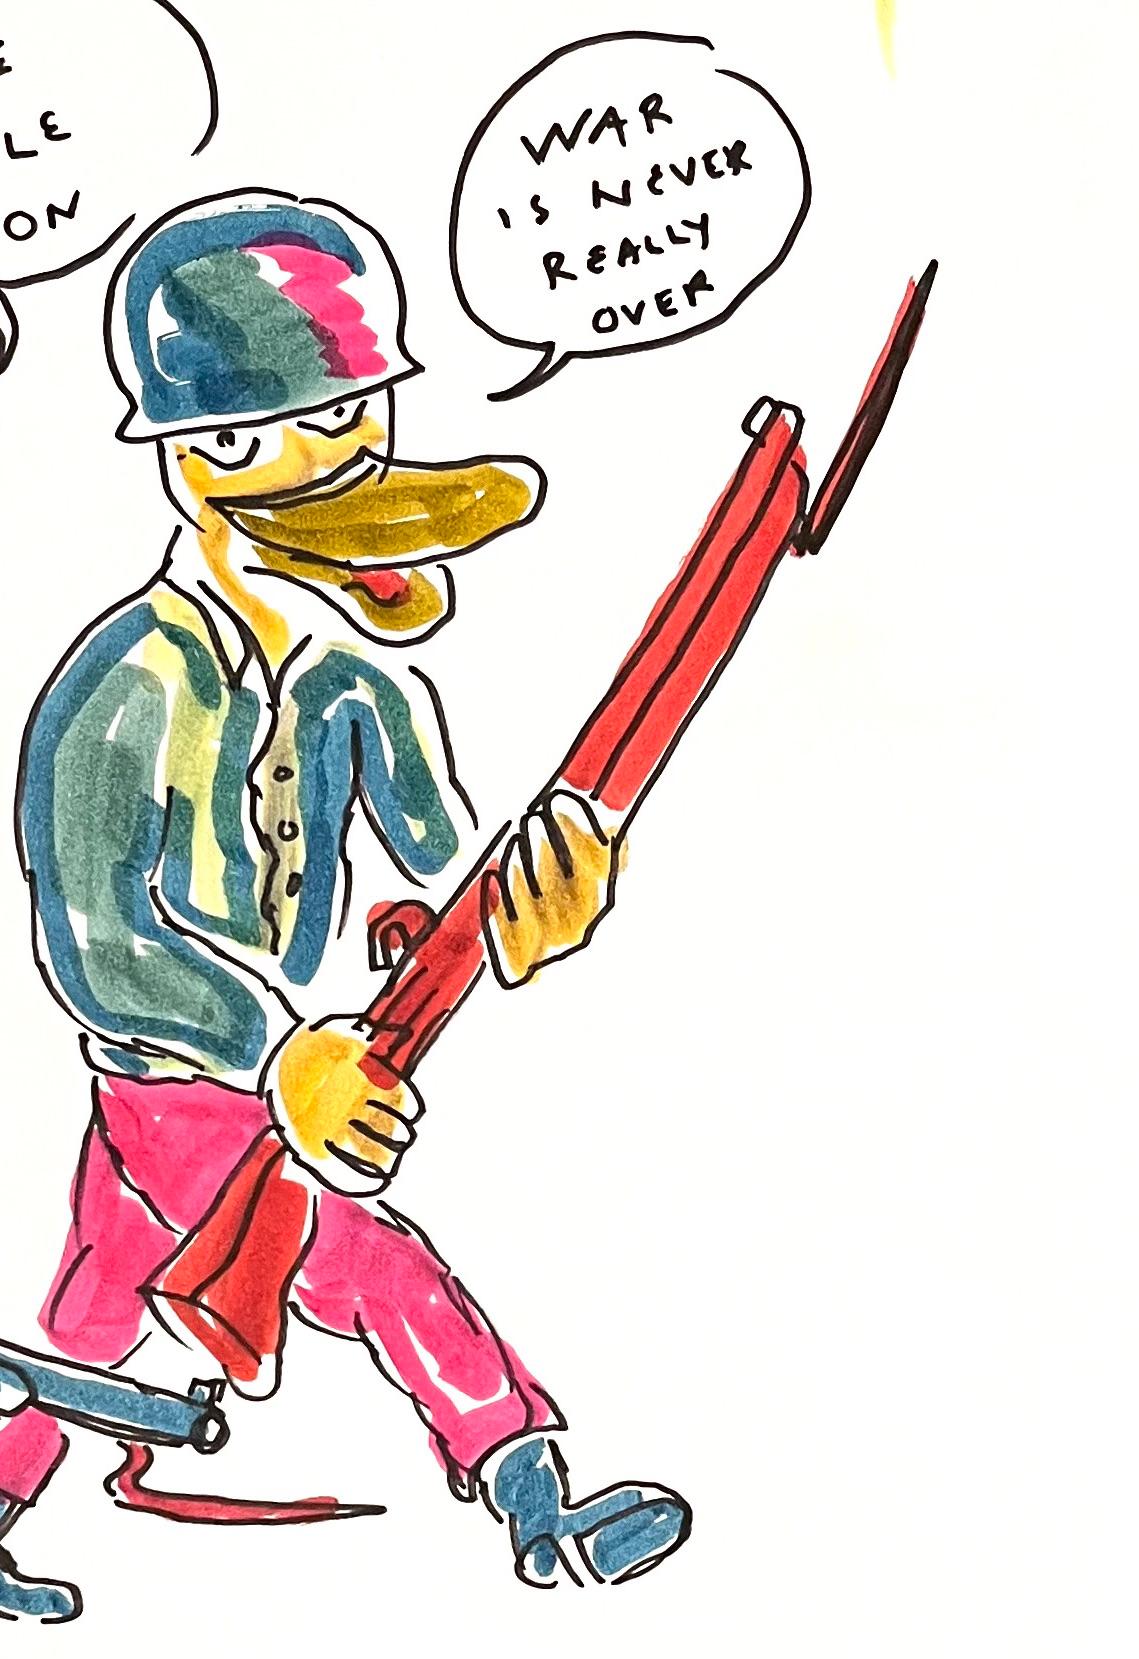 The Battle is On - Figure Ink Drawing on Paper, Outsider Art, Duck Wars Series For Sale 1